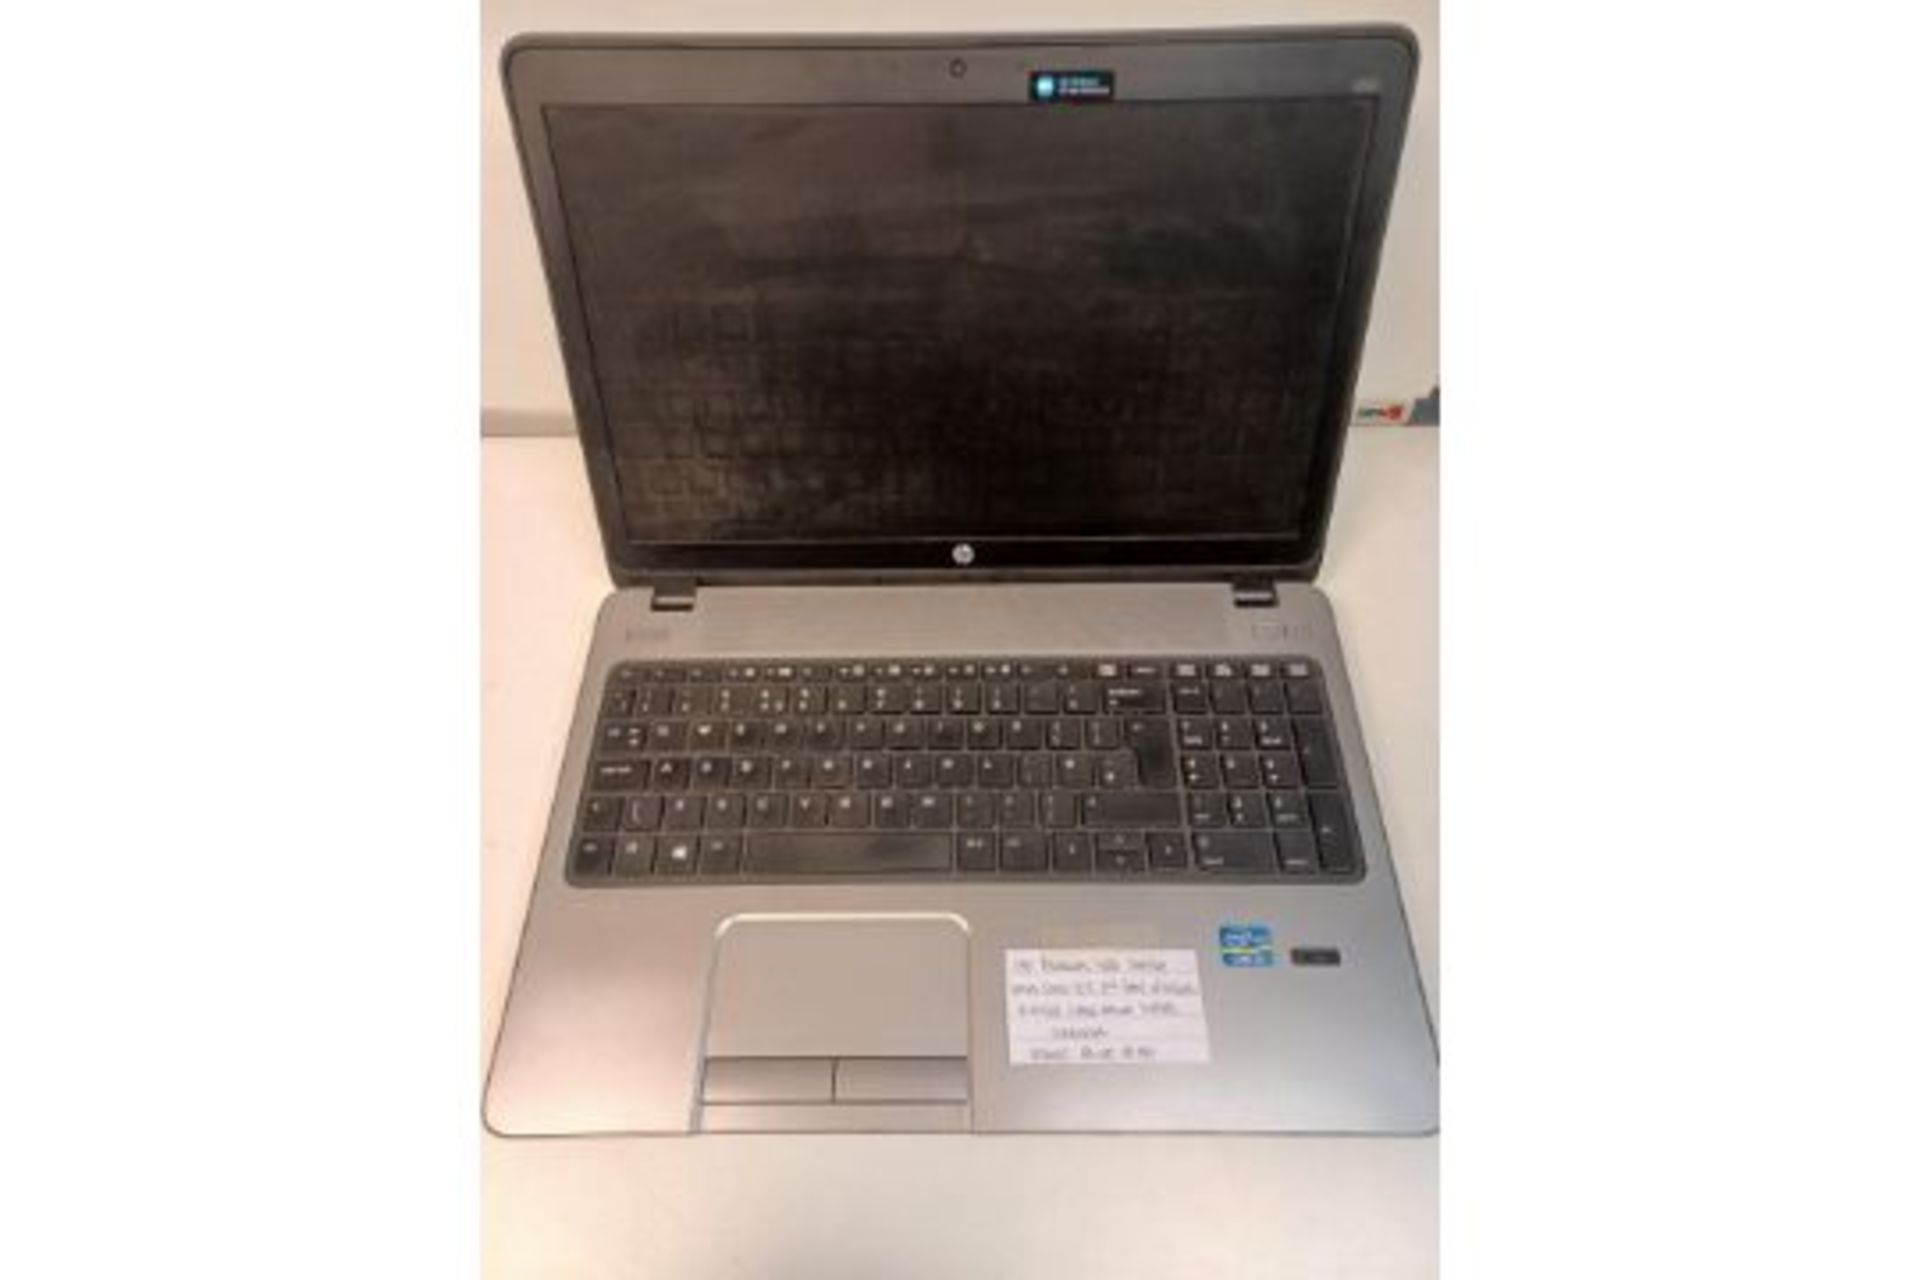 HP PROBOOK 450 LAPTOP INTEL CORE I5 3RD GEN 2.6GHZ 250GB HARD DRIVE WITH CHARGER (31)